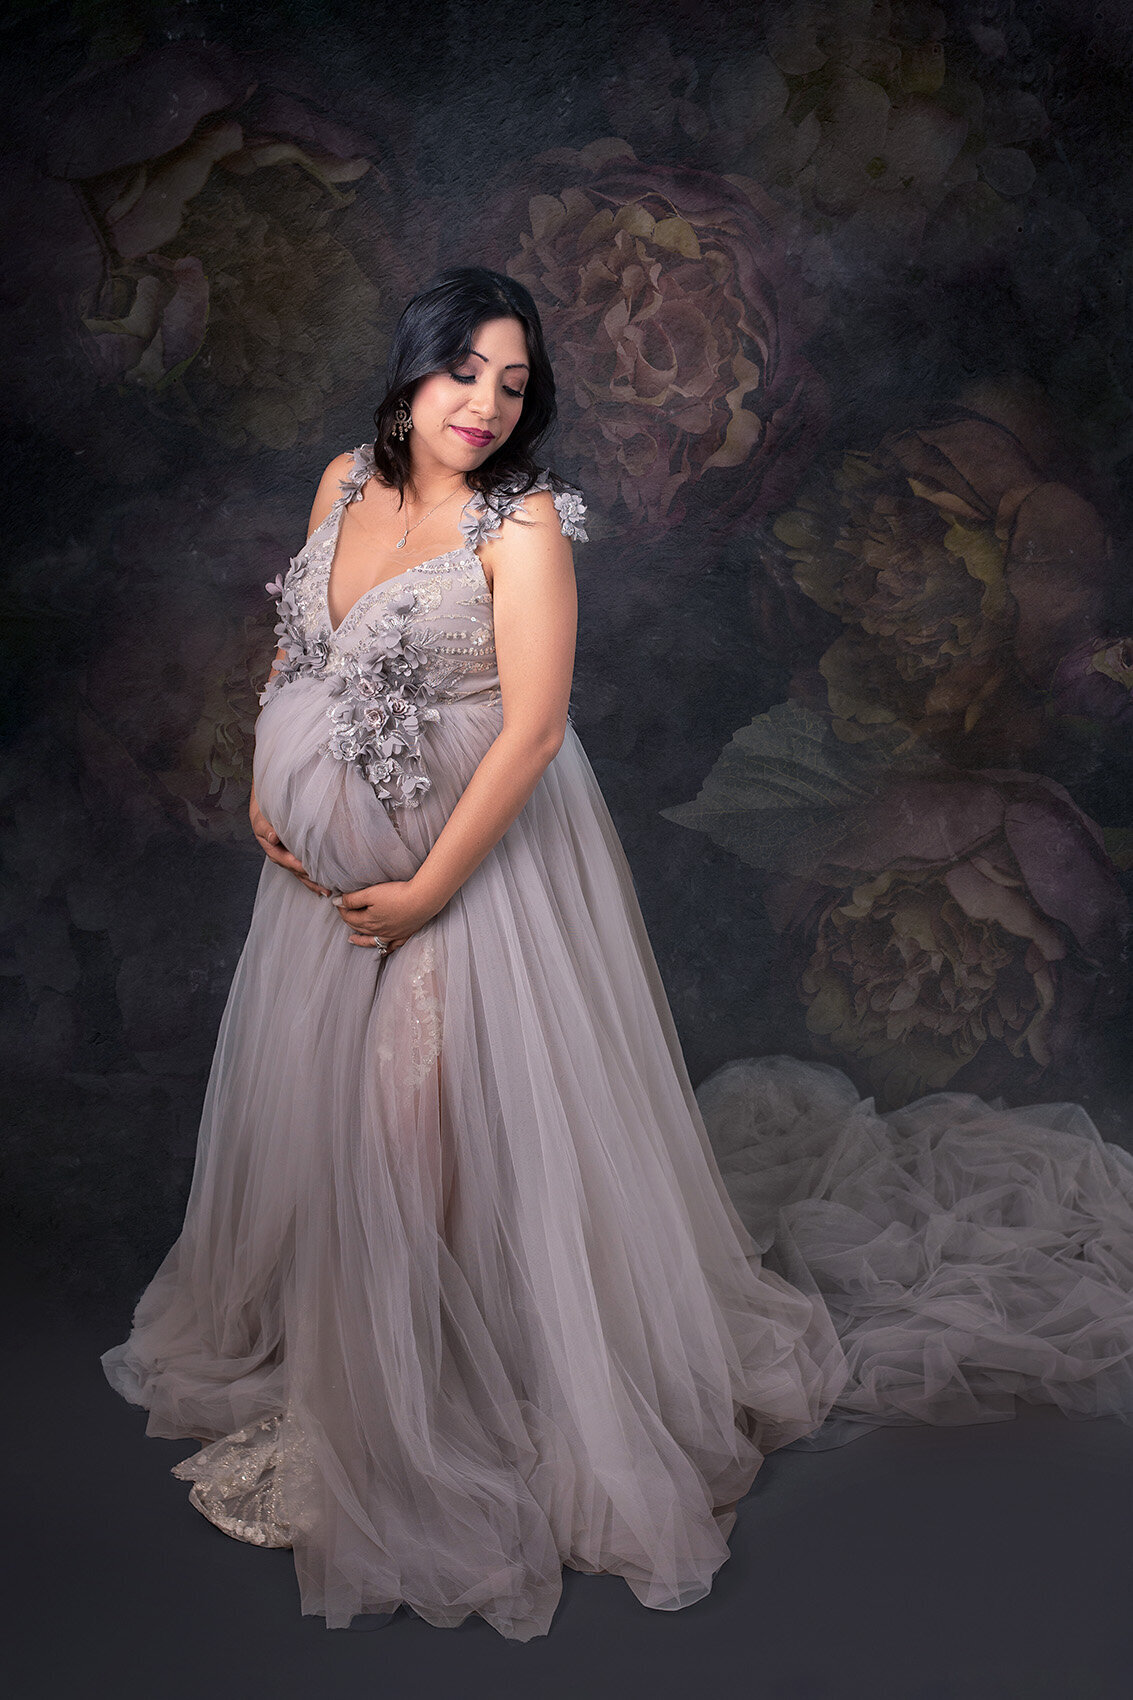 Pregnant woman in a couture gown by Before And Ever, standing in front of a floral backdrop.